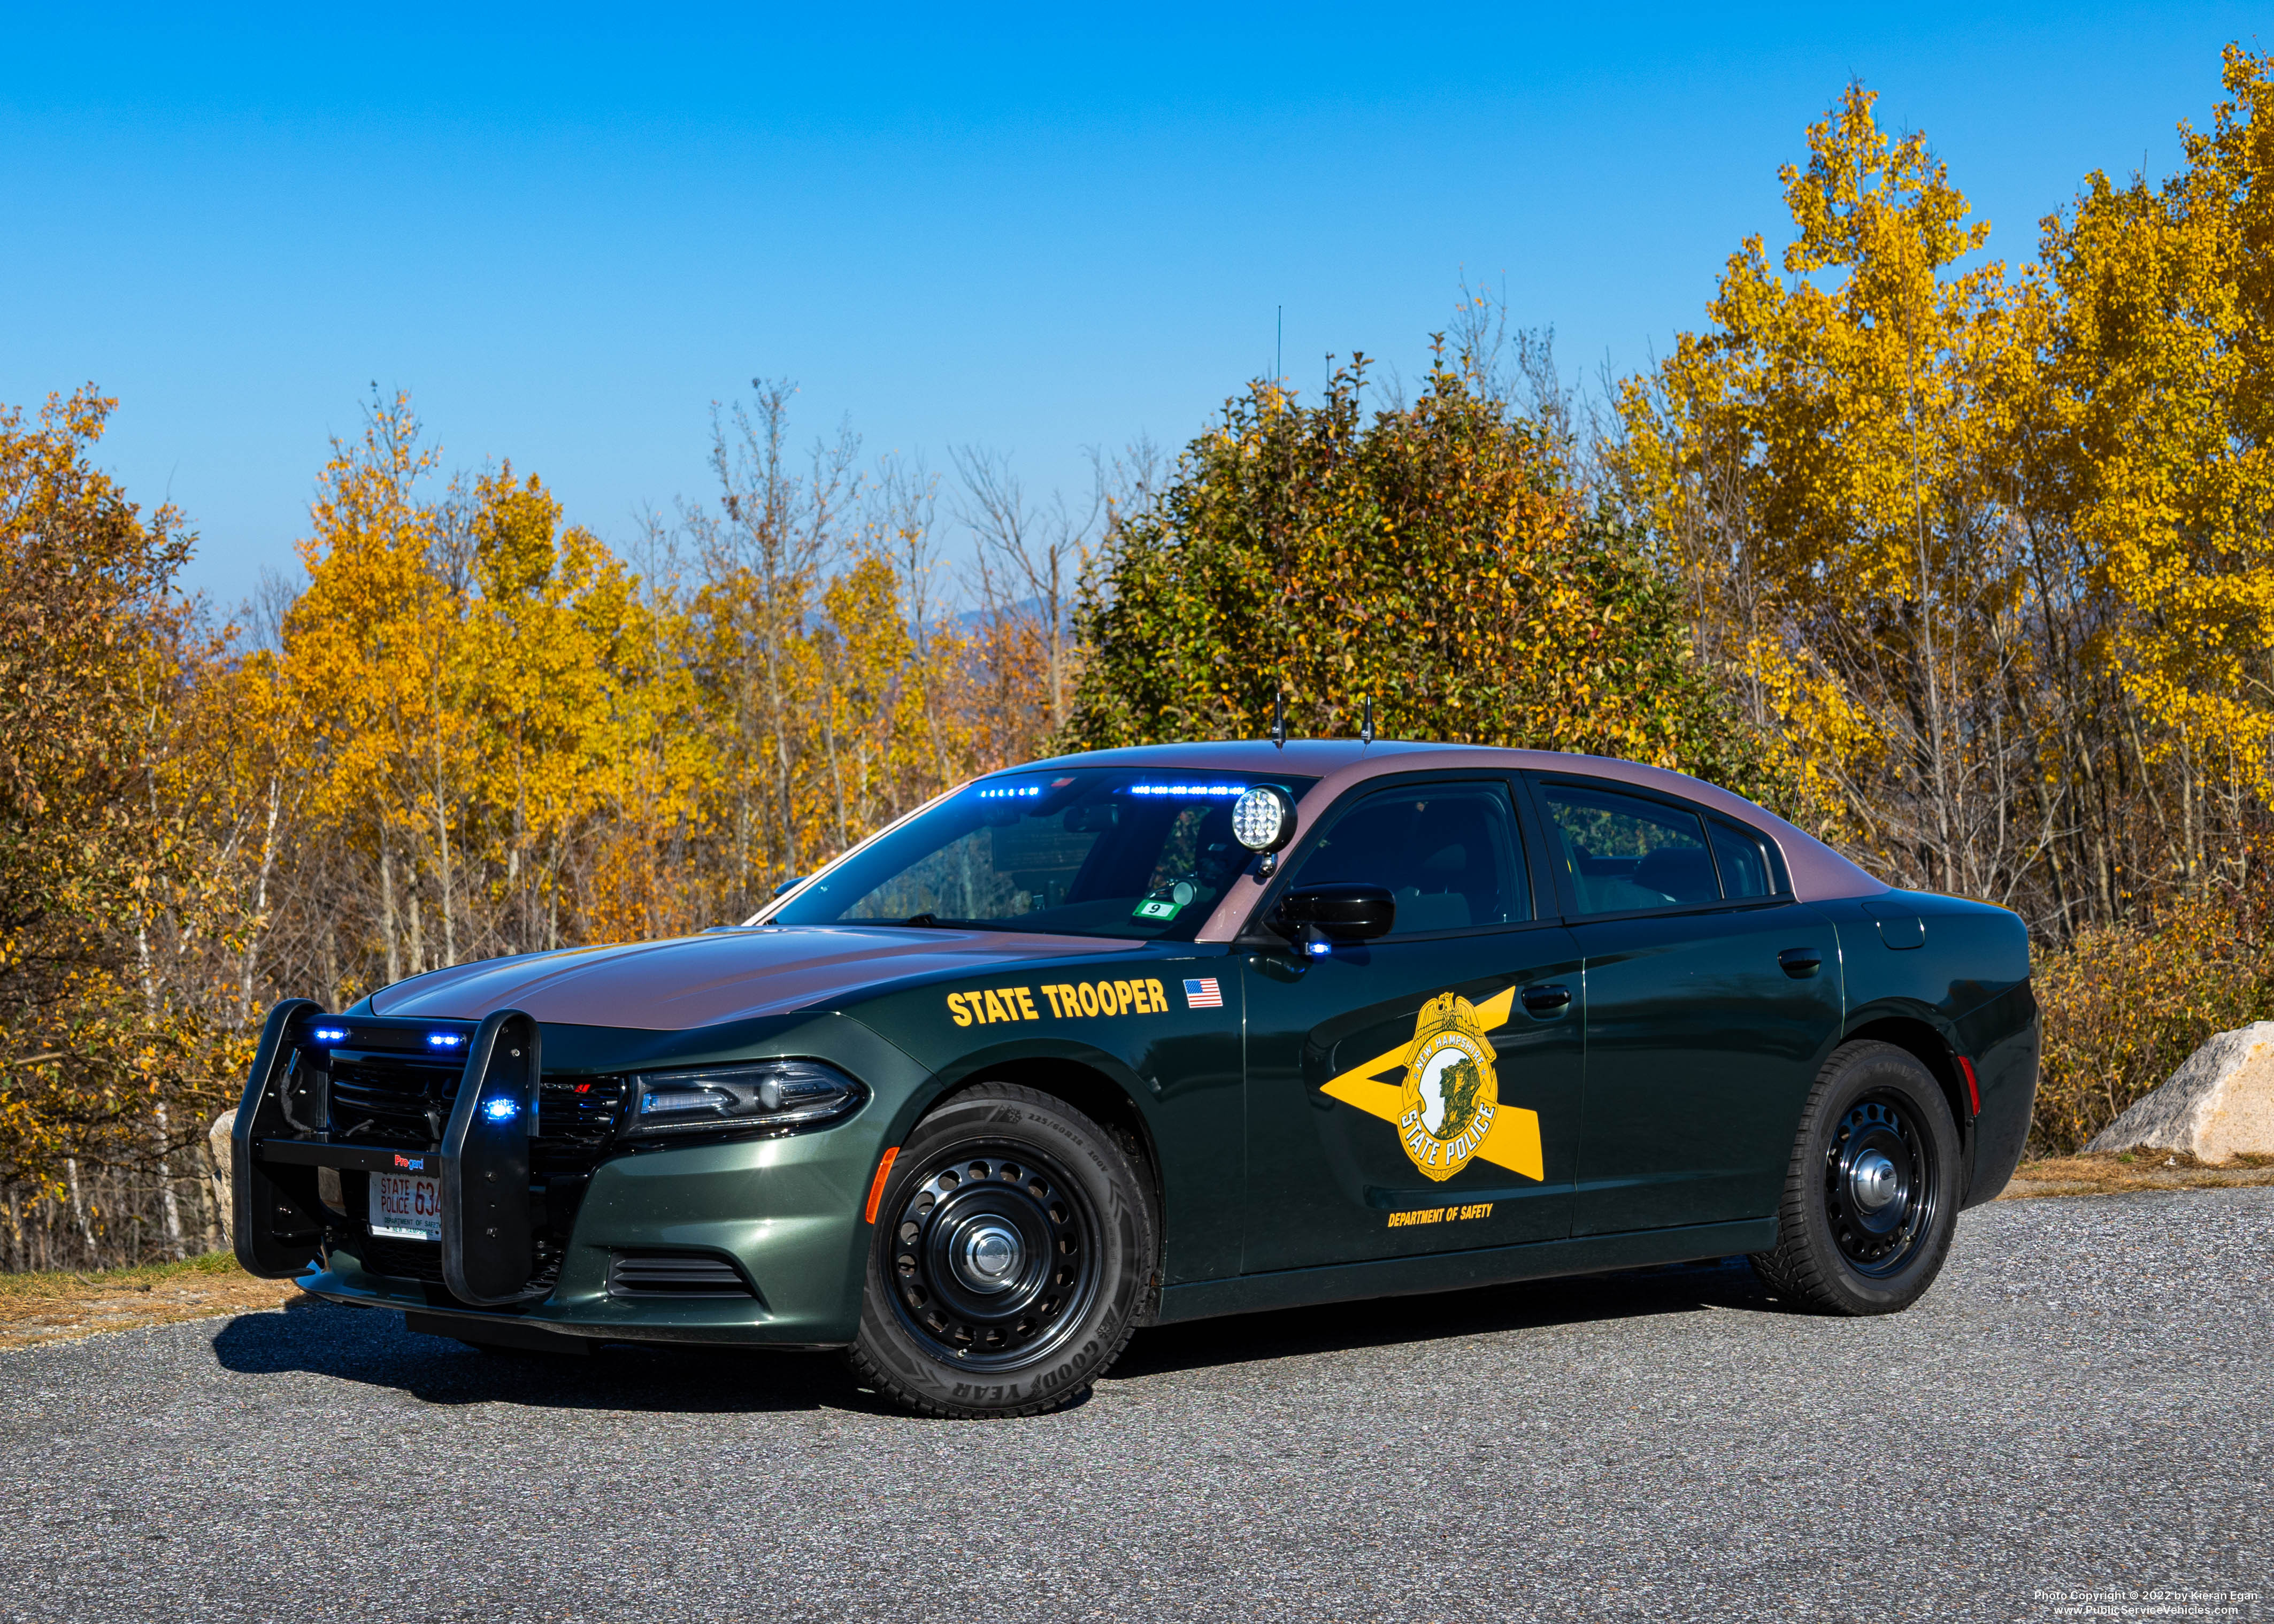 A photo  of New Hampshire State Police
            Cruiser 634, a 2019 Dodge Charger             taken by Kieran Egan